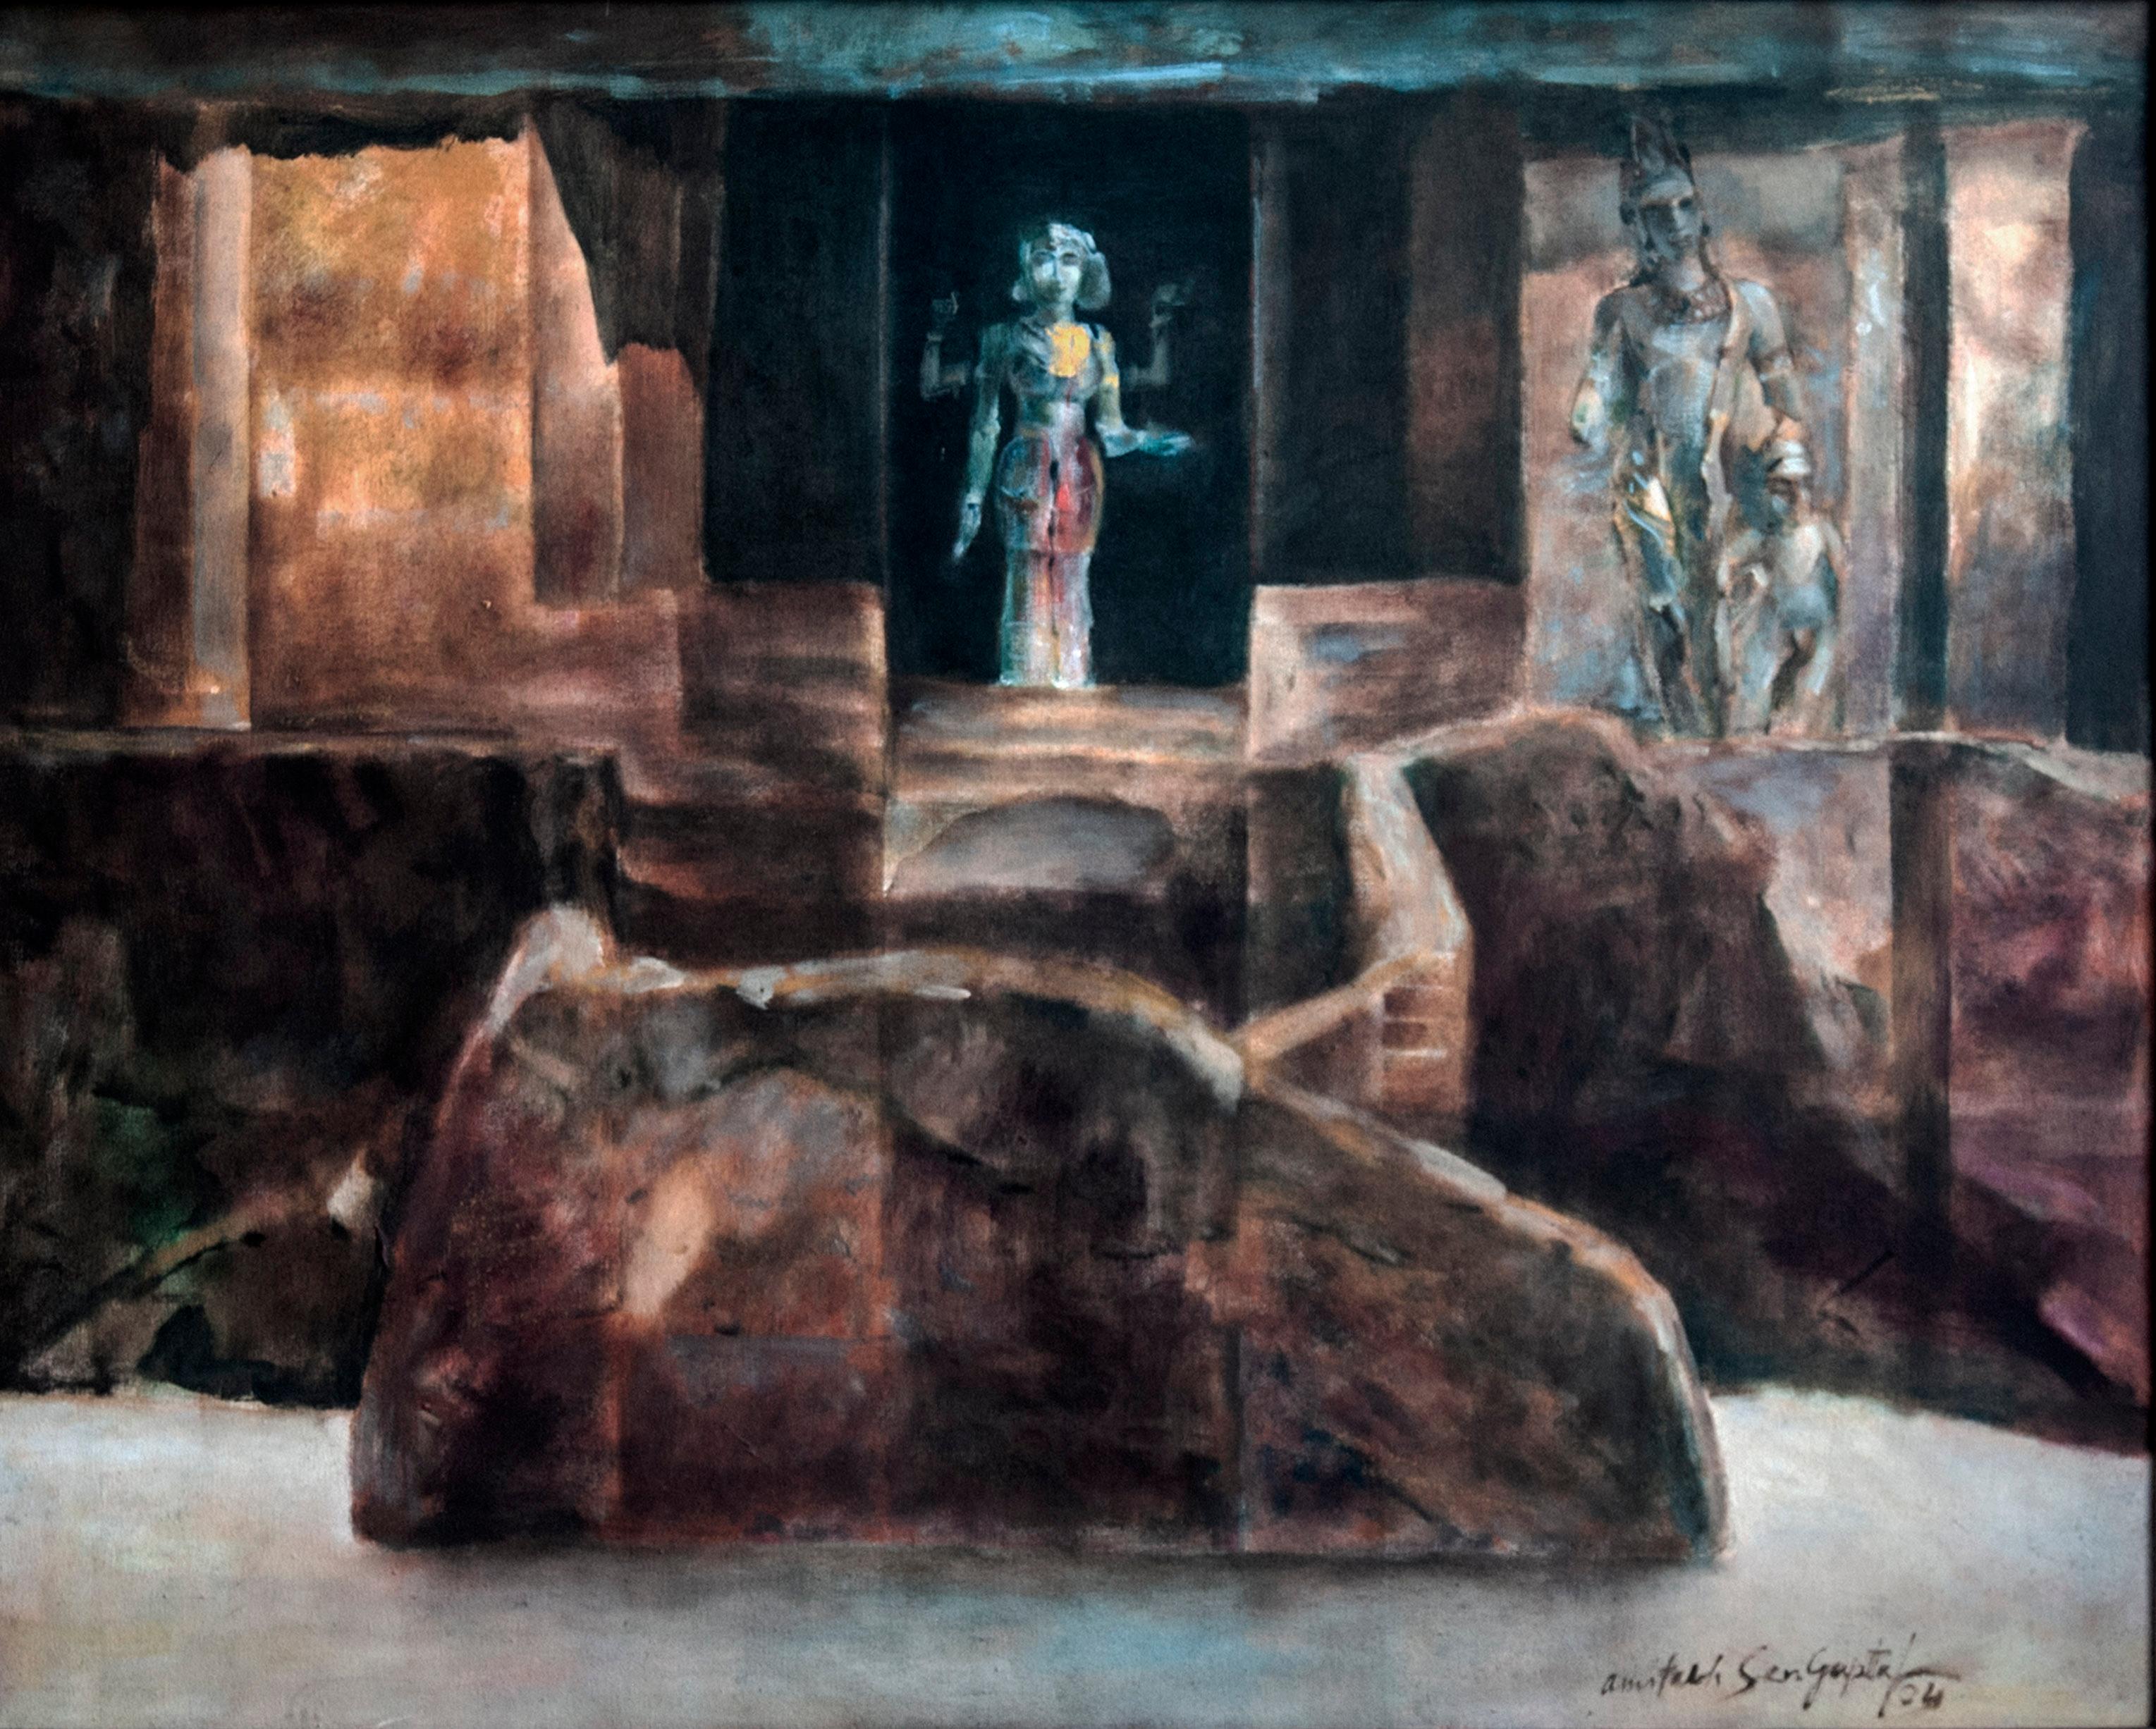 Amitabh Sengupta Figurative Painting - Deity, Mythscape Series, Structures, Indian Art, Oil on canvas, Brown "In Stock"